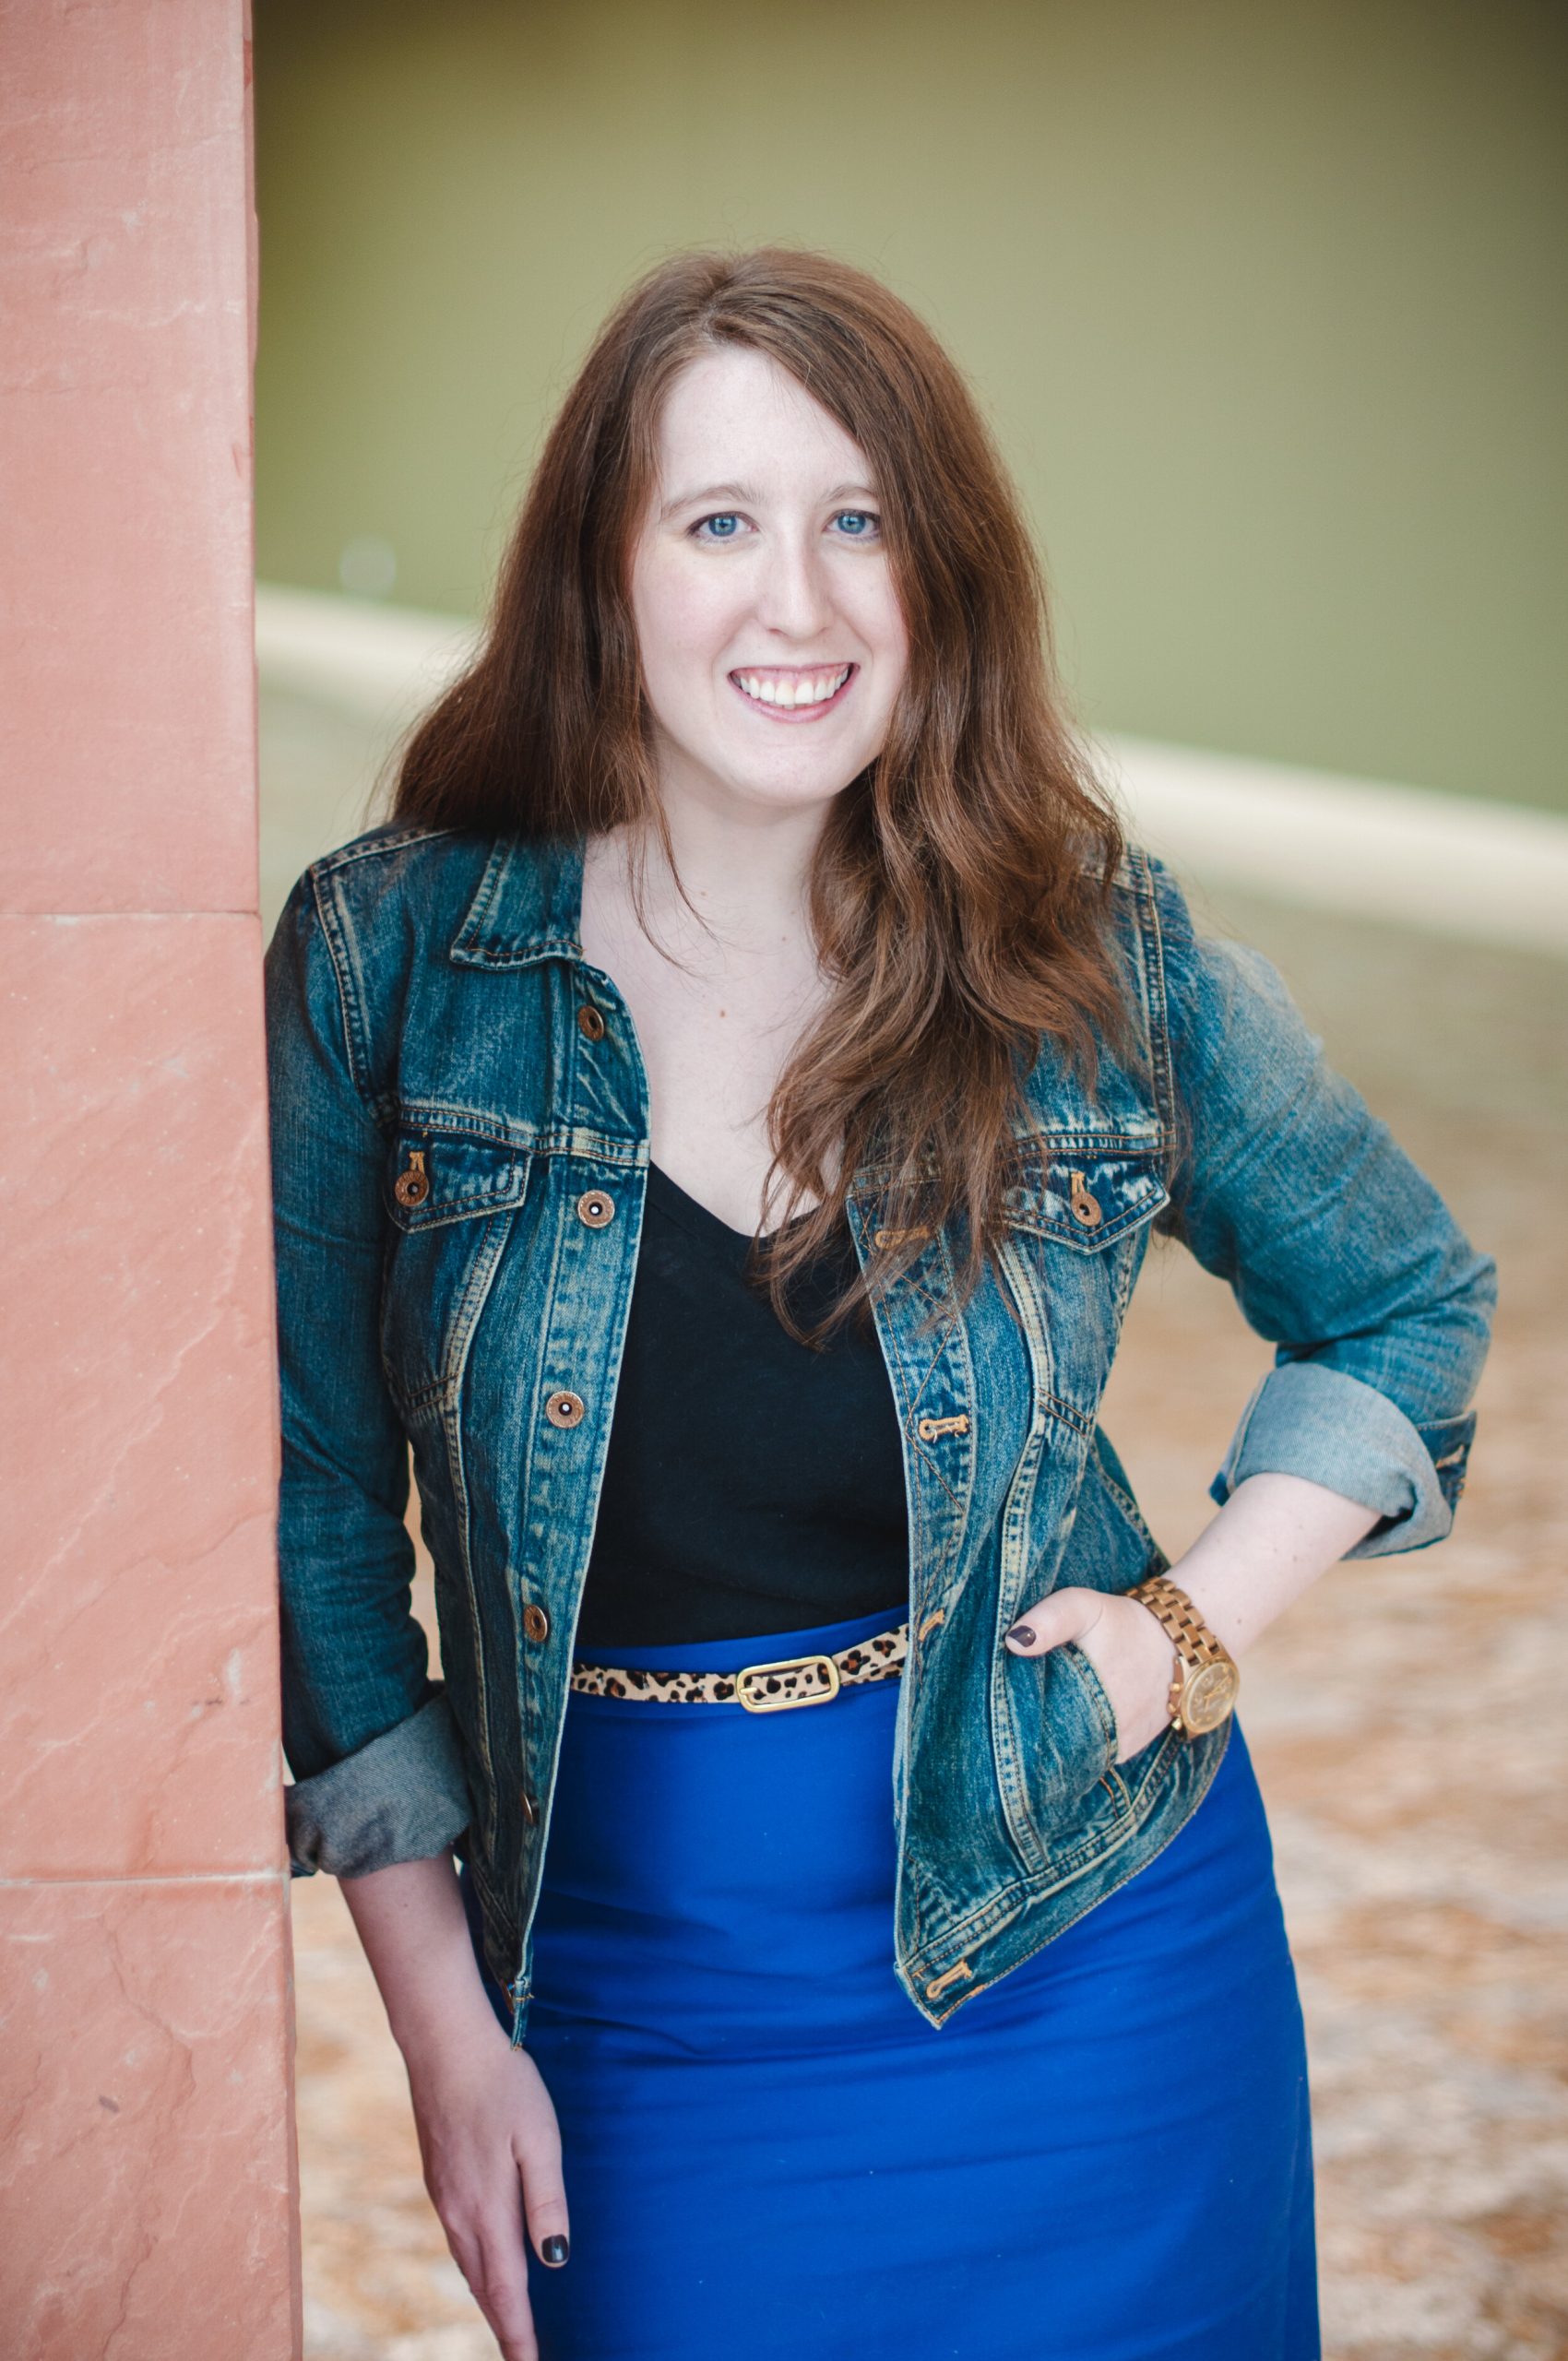 A photo of Melissa Frain. She is wearing a jean jacket over a black top and blue skirt, and leaning against a wall outdoors. She has one hand in her pocket.